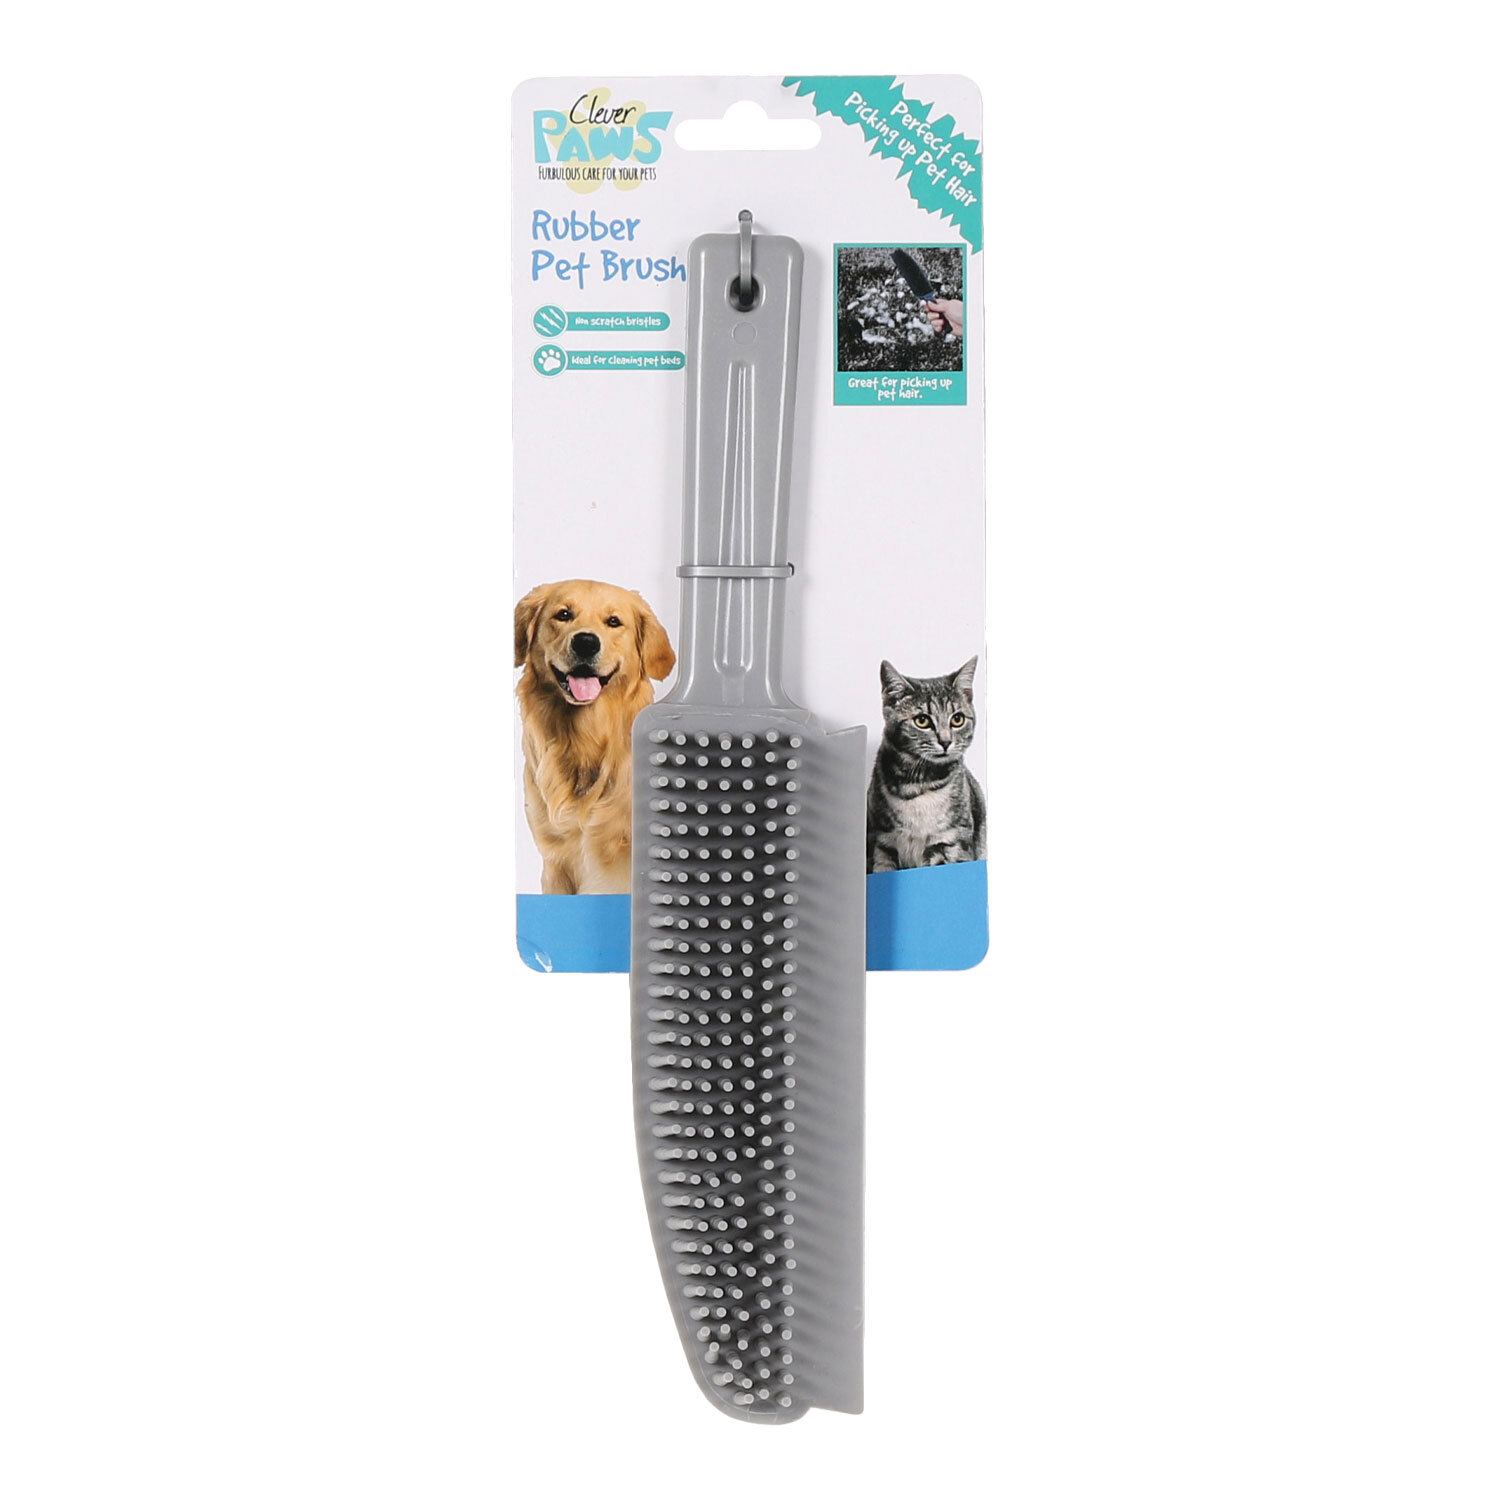 Clever Paws Rubber Pet Brush Image